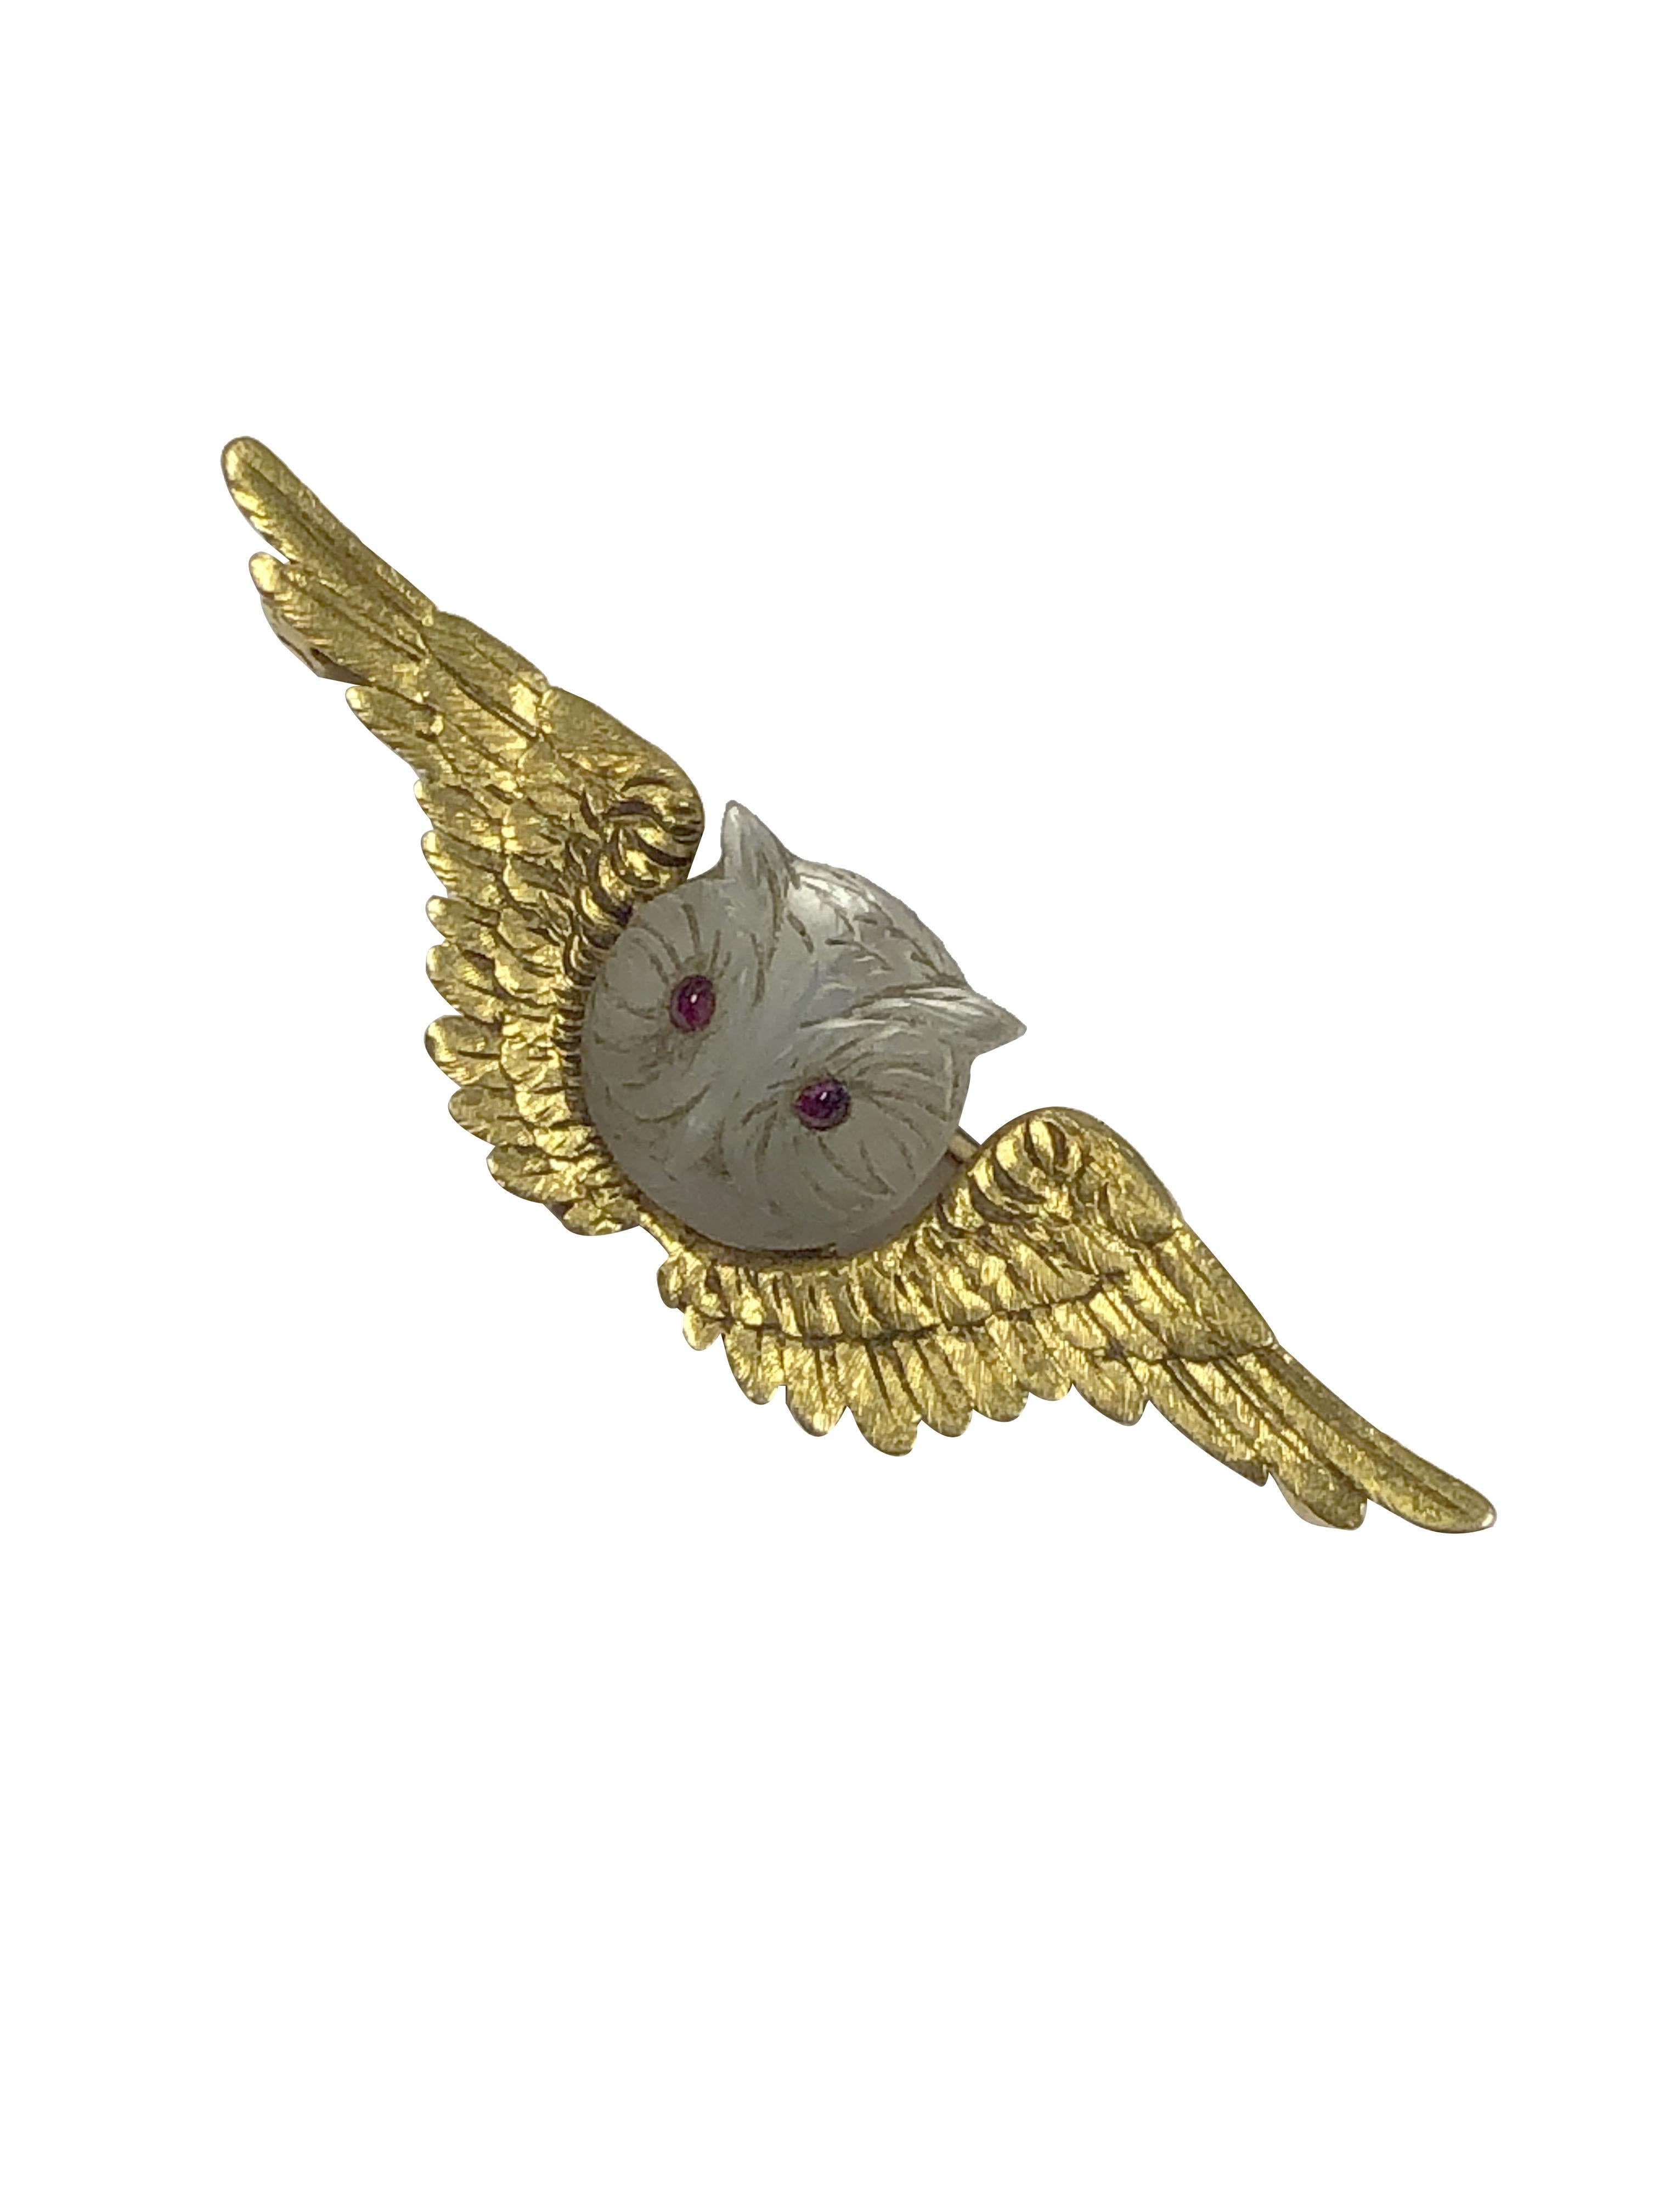 Circa 1900 Tiffany & Company 14k Yellow Gold Winged Owl Brooch, measuring 1 3/4 inches in length X 1/2 inch and having a 